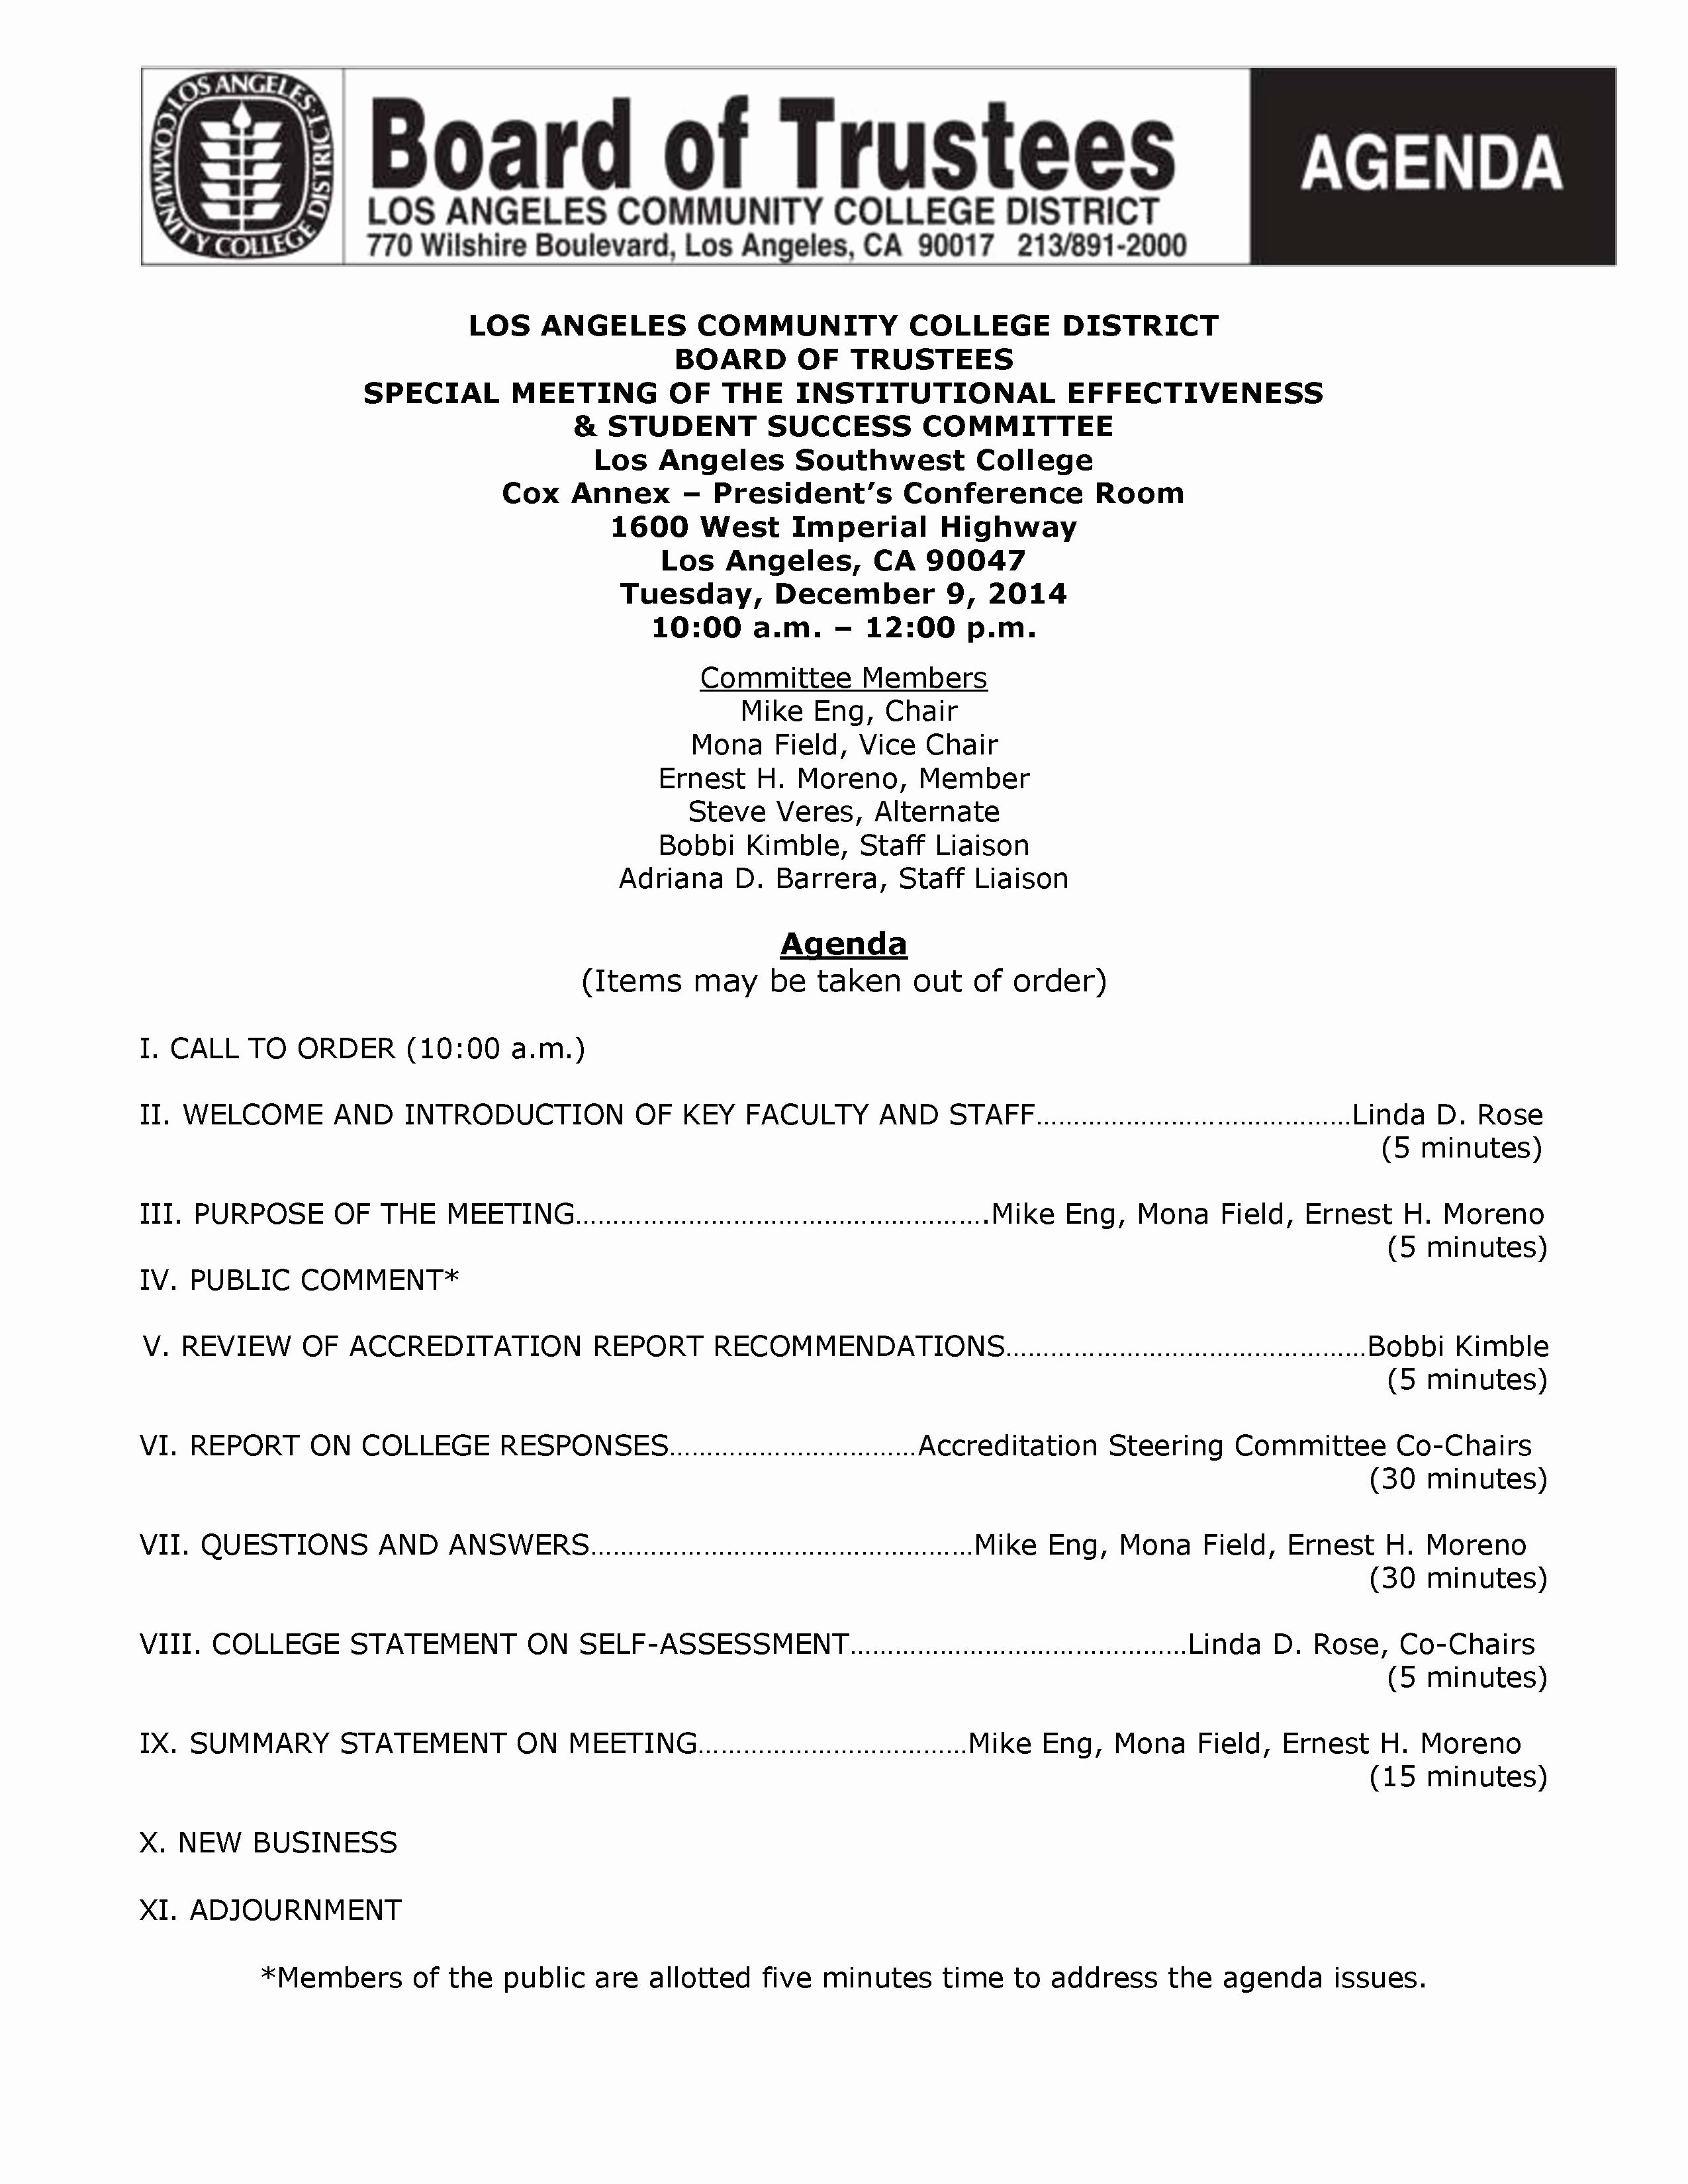 Board Of Directors Meeting Agenda New Board Of Trustees Meeting Tuesday at Lasc